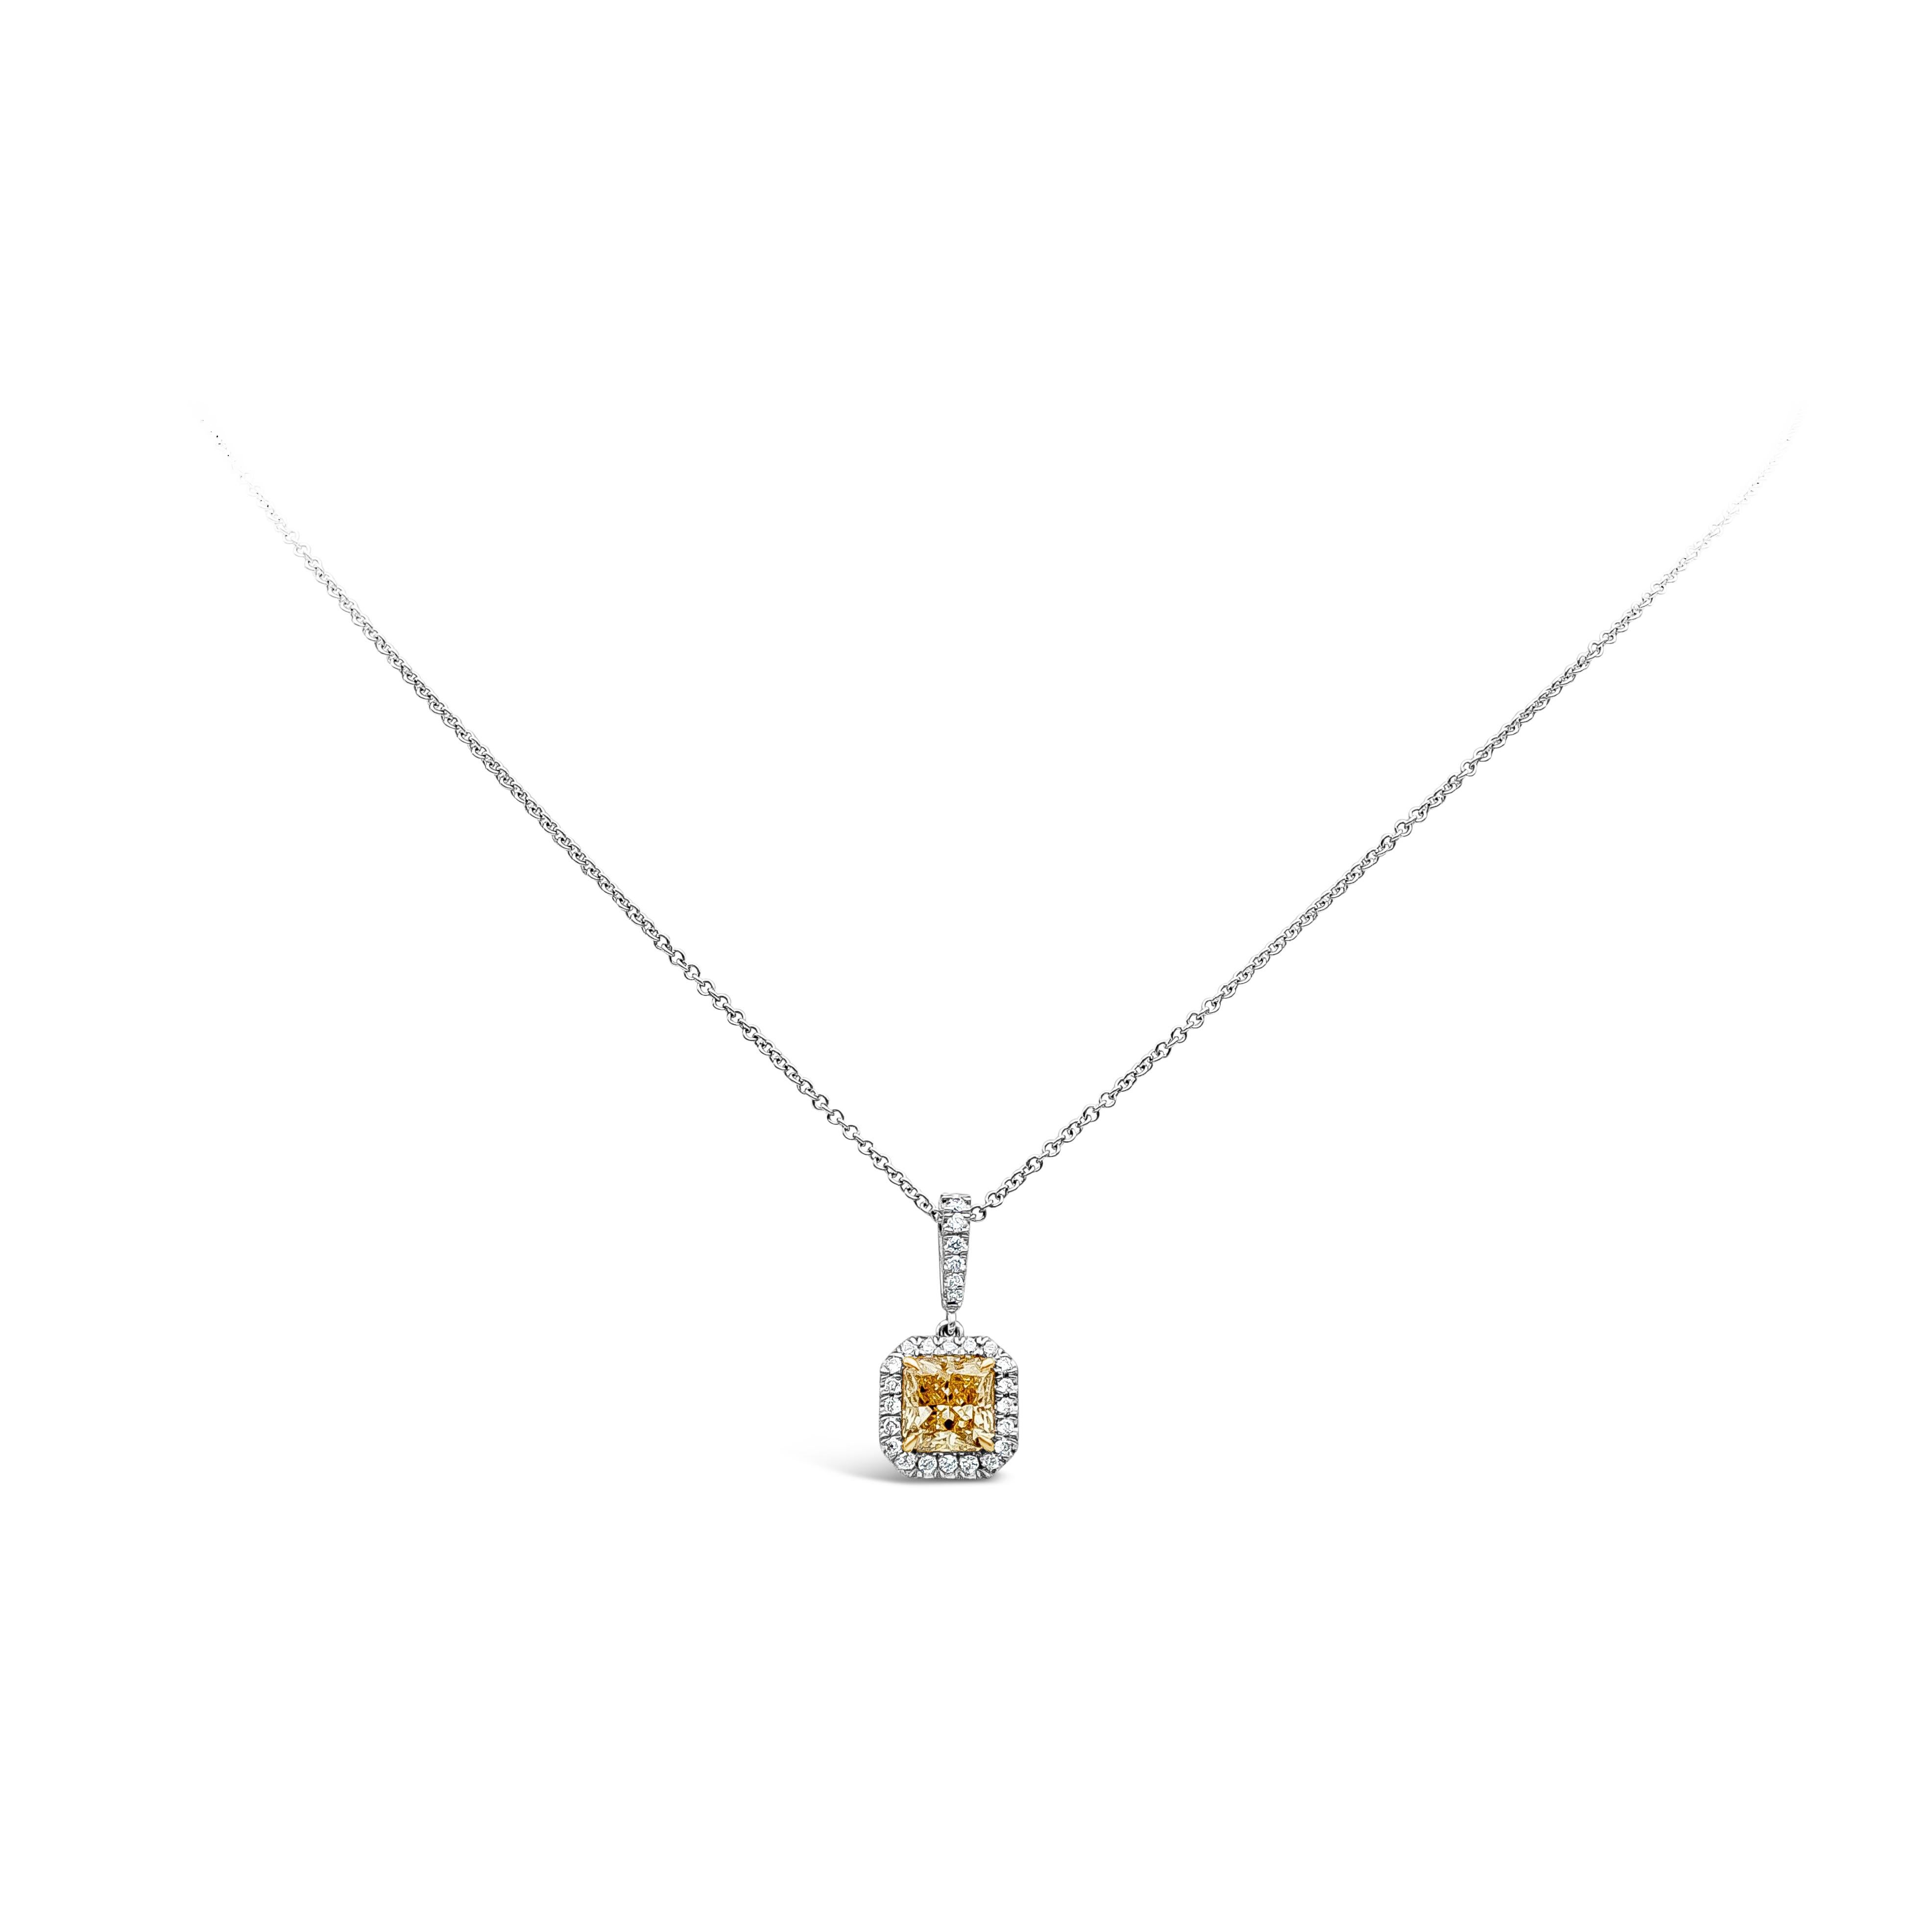 This beautiful 1.04 carat radiant cut yellow diamond, set by yellow gold prongs, is surrounded by brilliant round diamonds. Hanging by a diamond encrusted bail on a 18k white gold chain. 

Style available in different price ranges. Prices are based